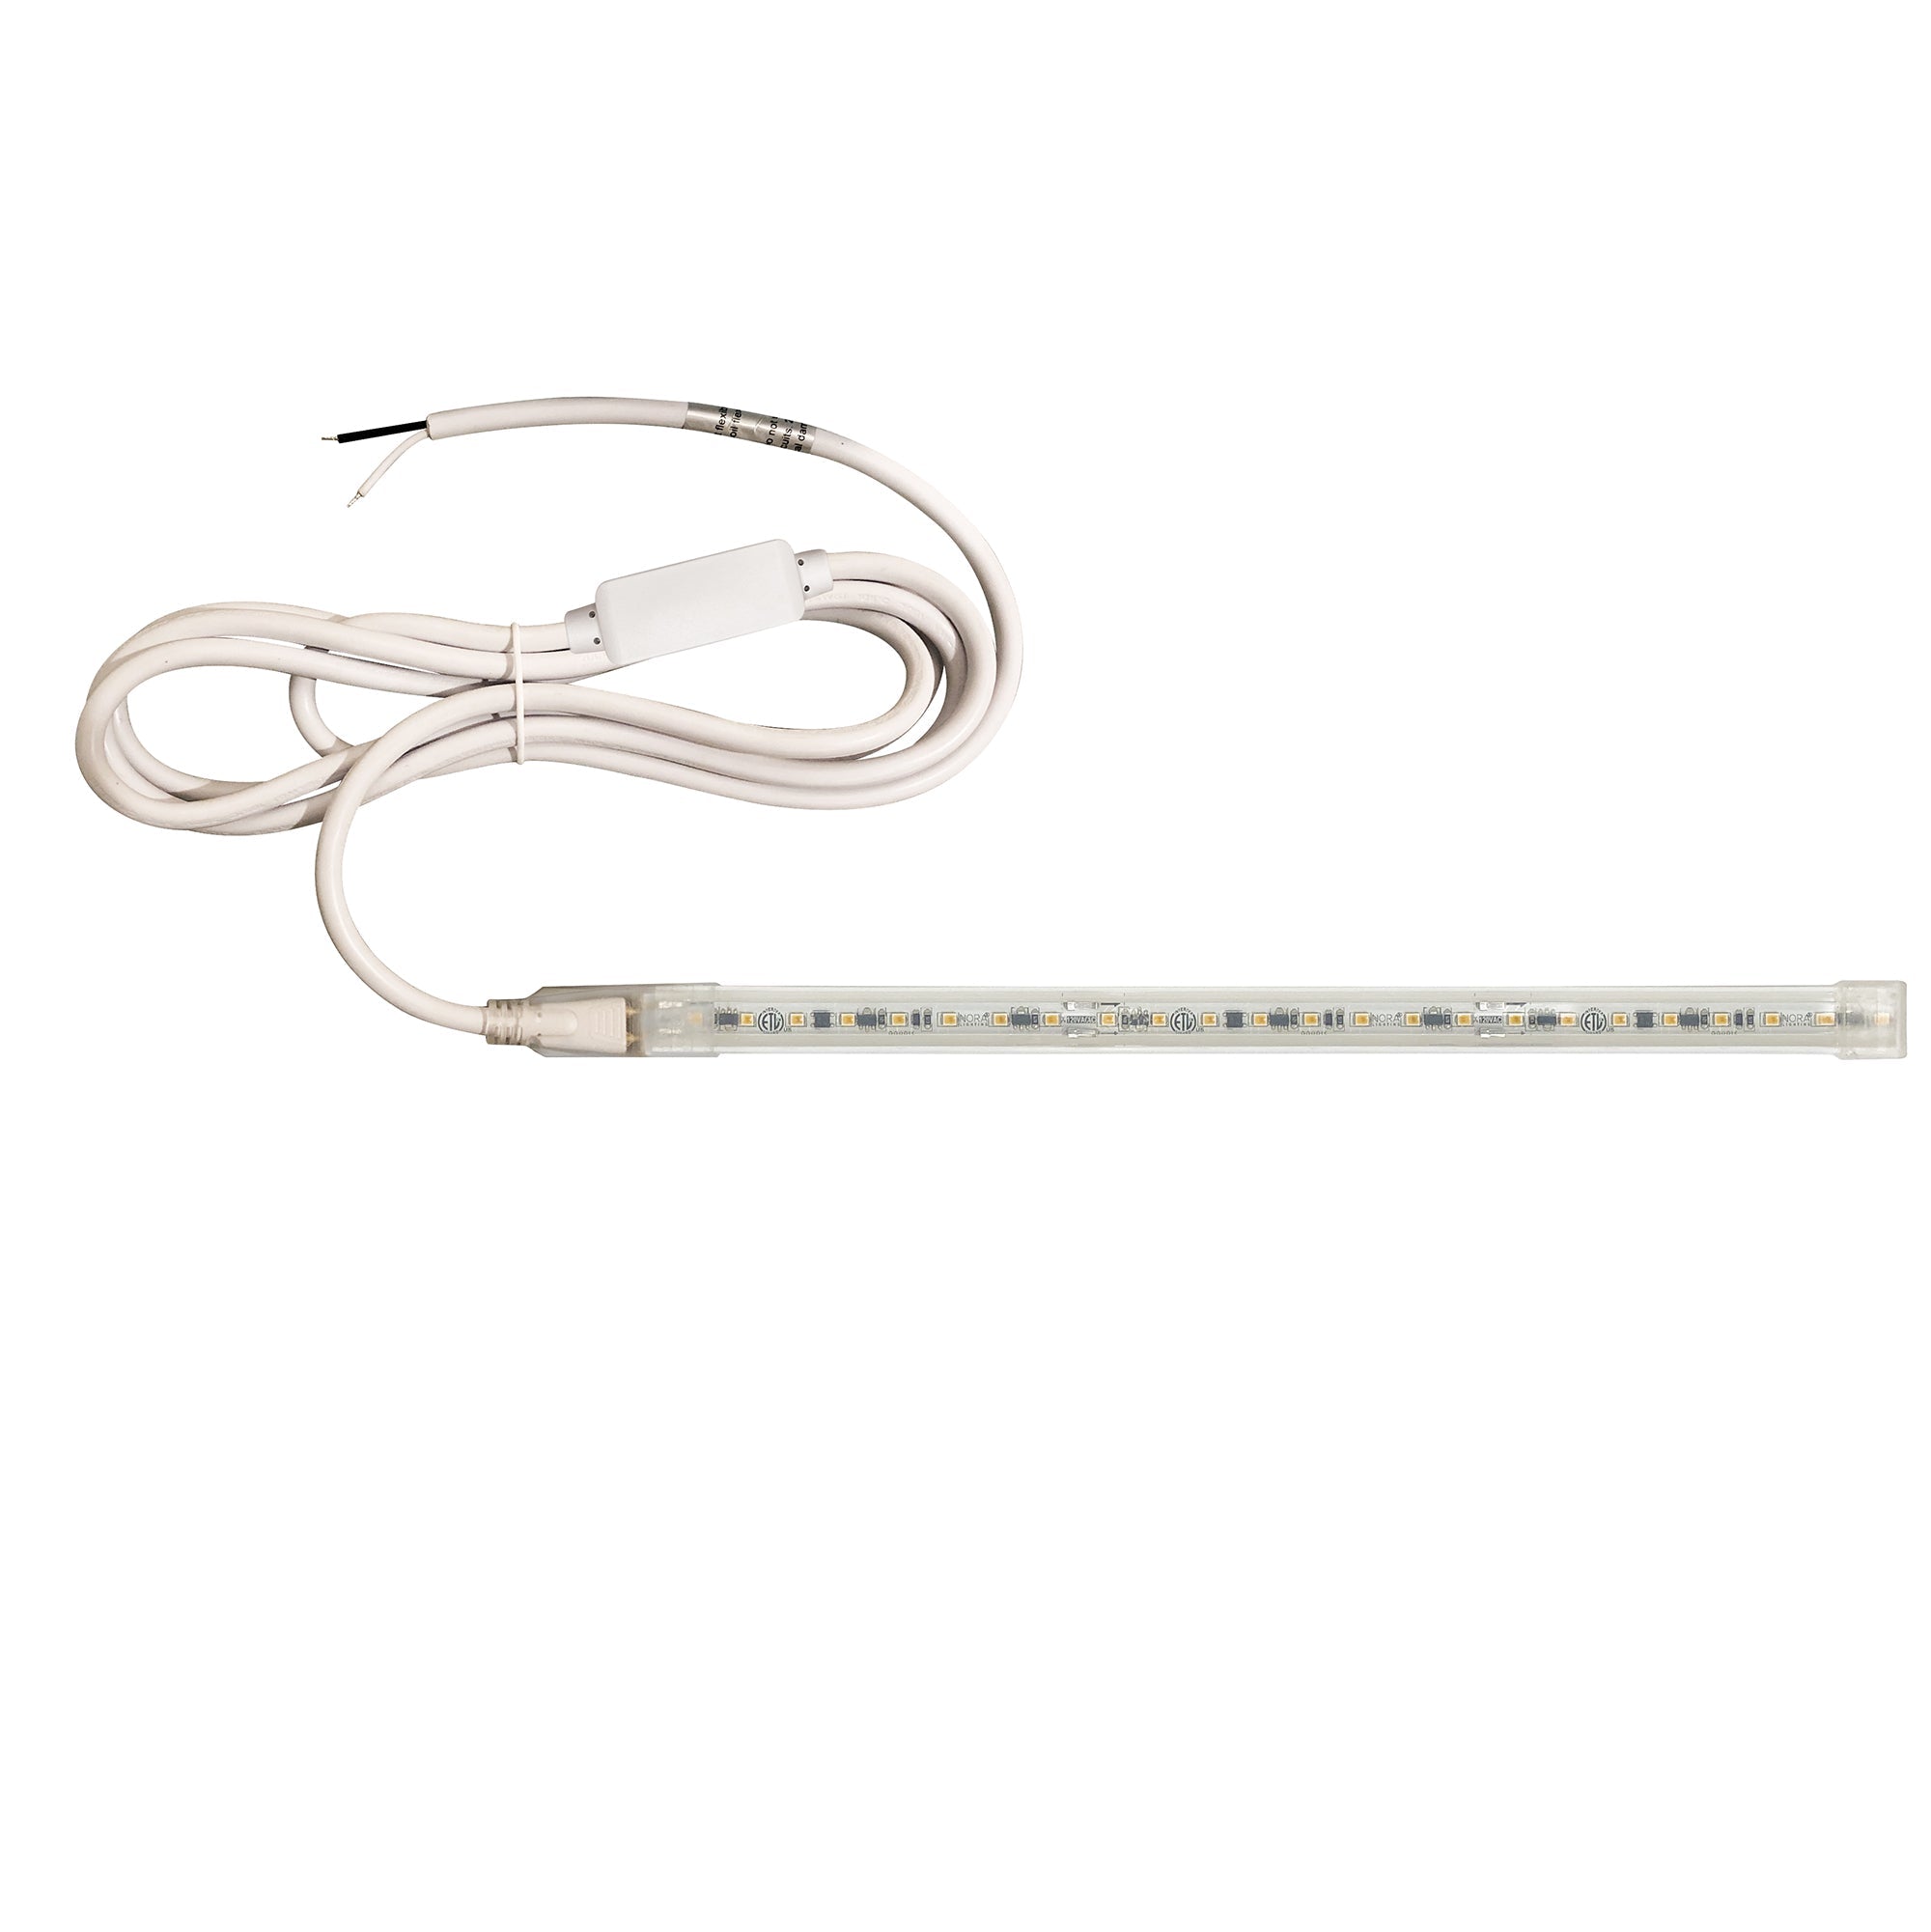 Nora Lighting NUTP13-W76-12-930/HWSP - Accent / Undercabinet - Custom Cut 76-ft 120V Continuous LED Tape Light, 330lm / 3.6W per foot, 3000K, w/ Mounting Clips and 8' Hardwired Power Cord w/ Surge Protector